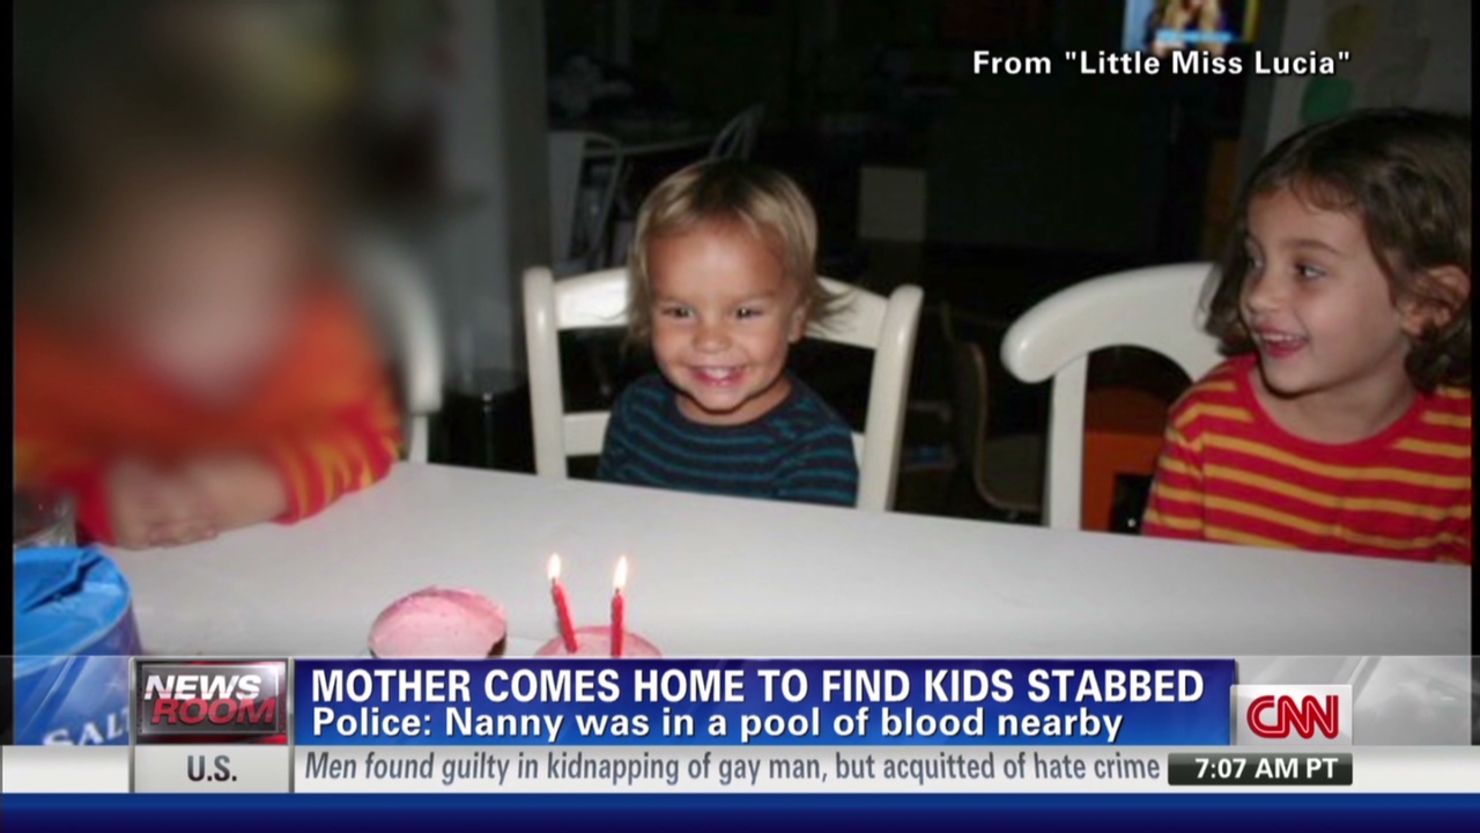 Leo and Lulu Krim, ages 2 and 6, were allegedly stabbed to death by their nanny at their New York home in October.